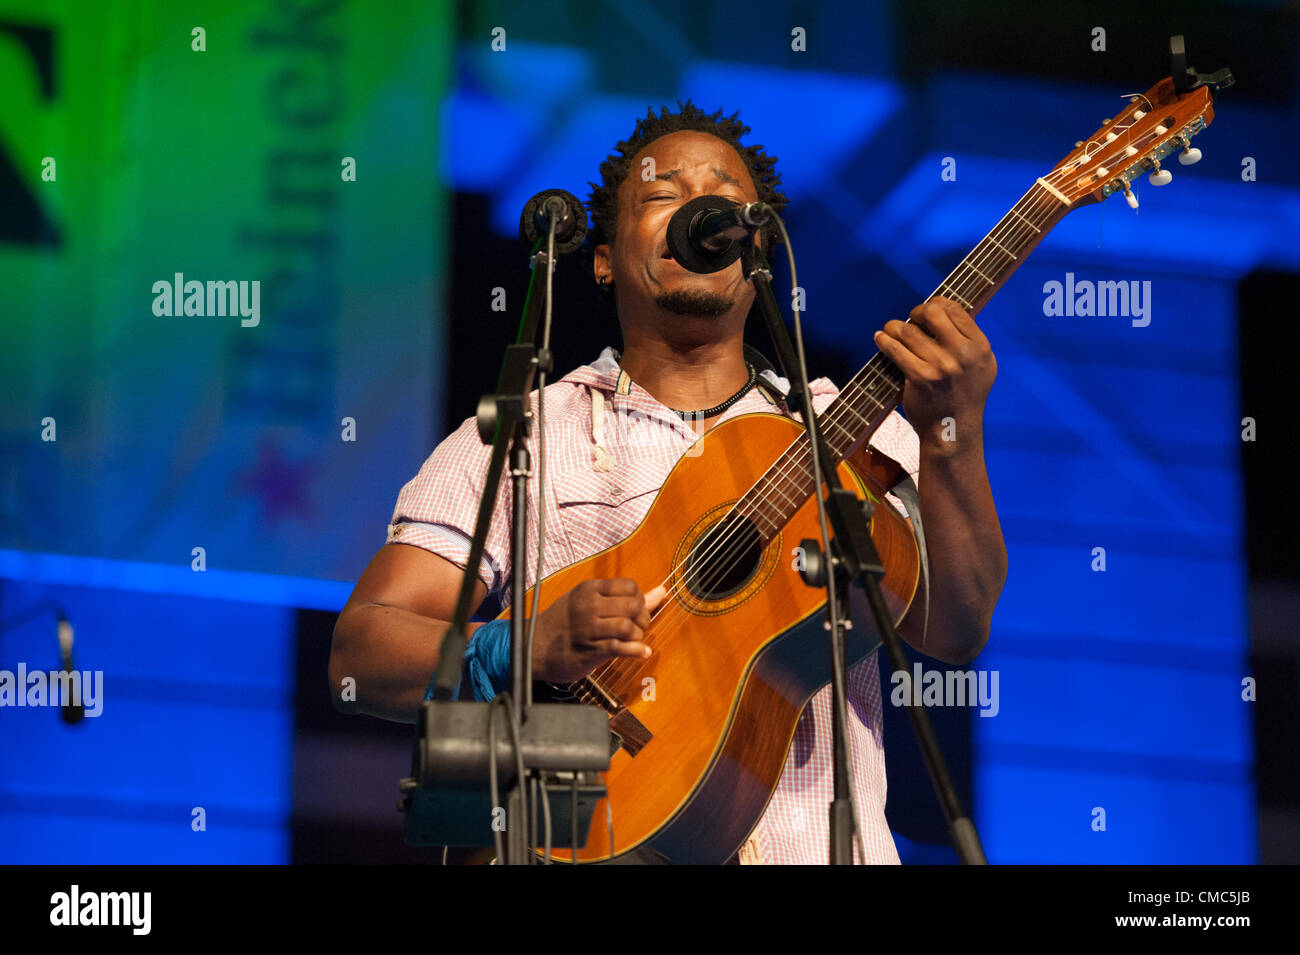 July 14, 2012 – Las Palmas, Canary Islands, Spain – Singer and guitarist Blick Bassy from Republic of Cameroon, onstage during festival international canarias jazz & mas Heineken, in Plaza Santa Ana, Las Palmas, Canary Islands, on Saturday 14 July 2012. Stock Photo